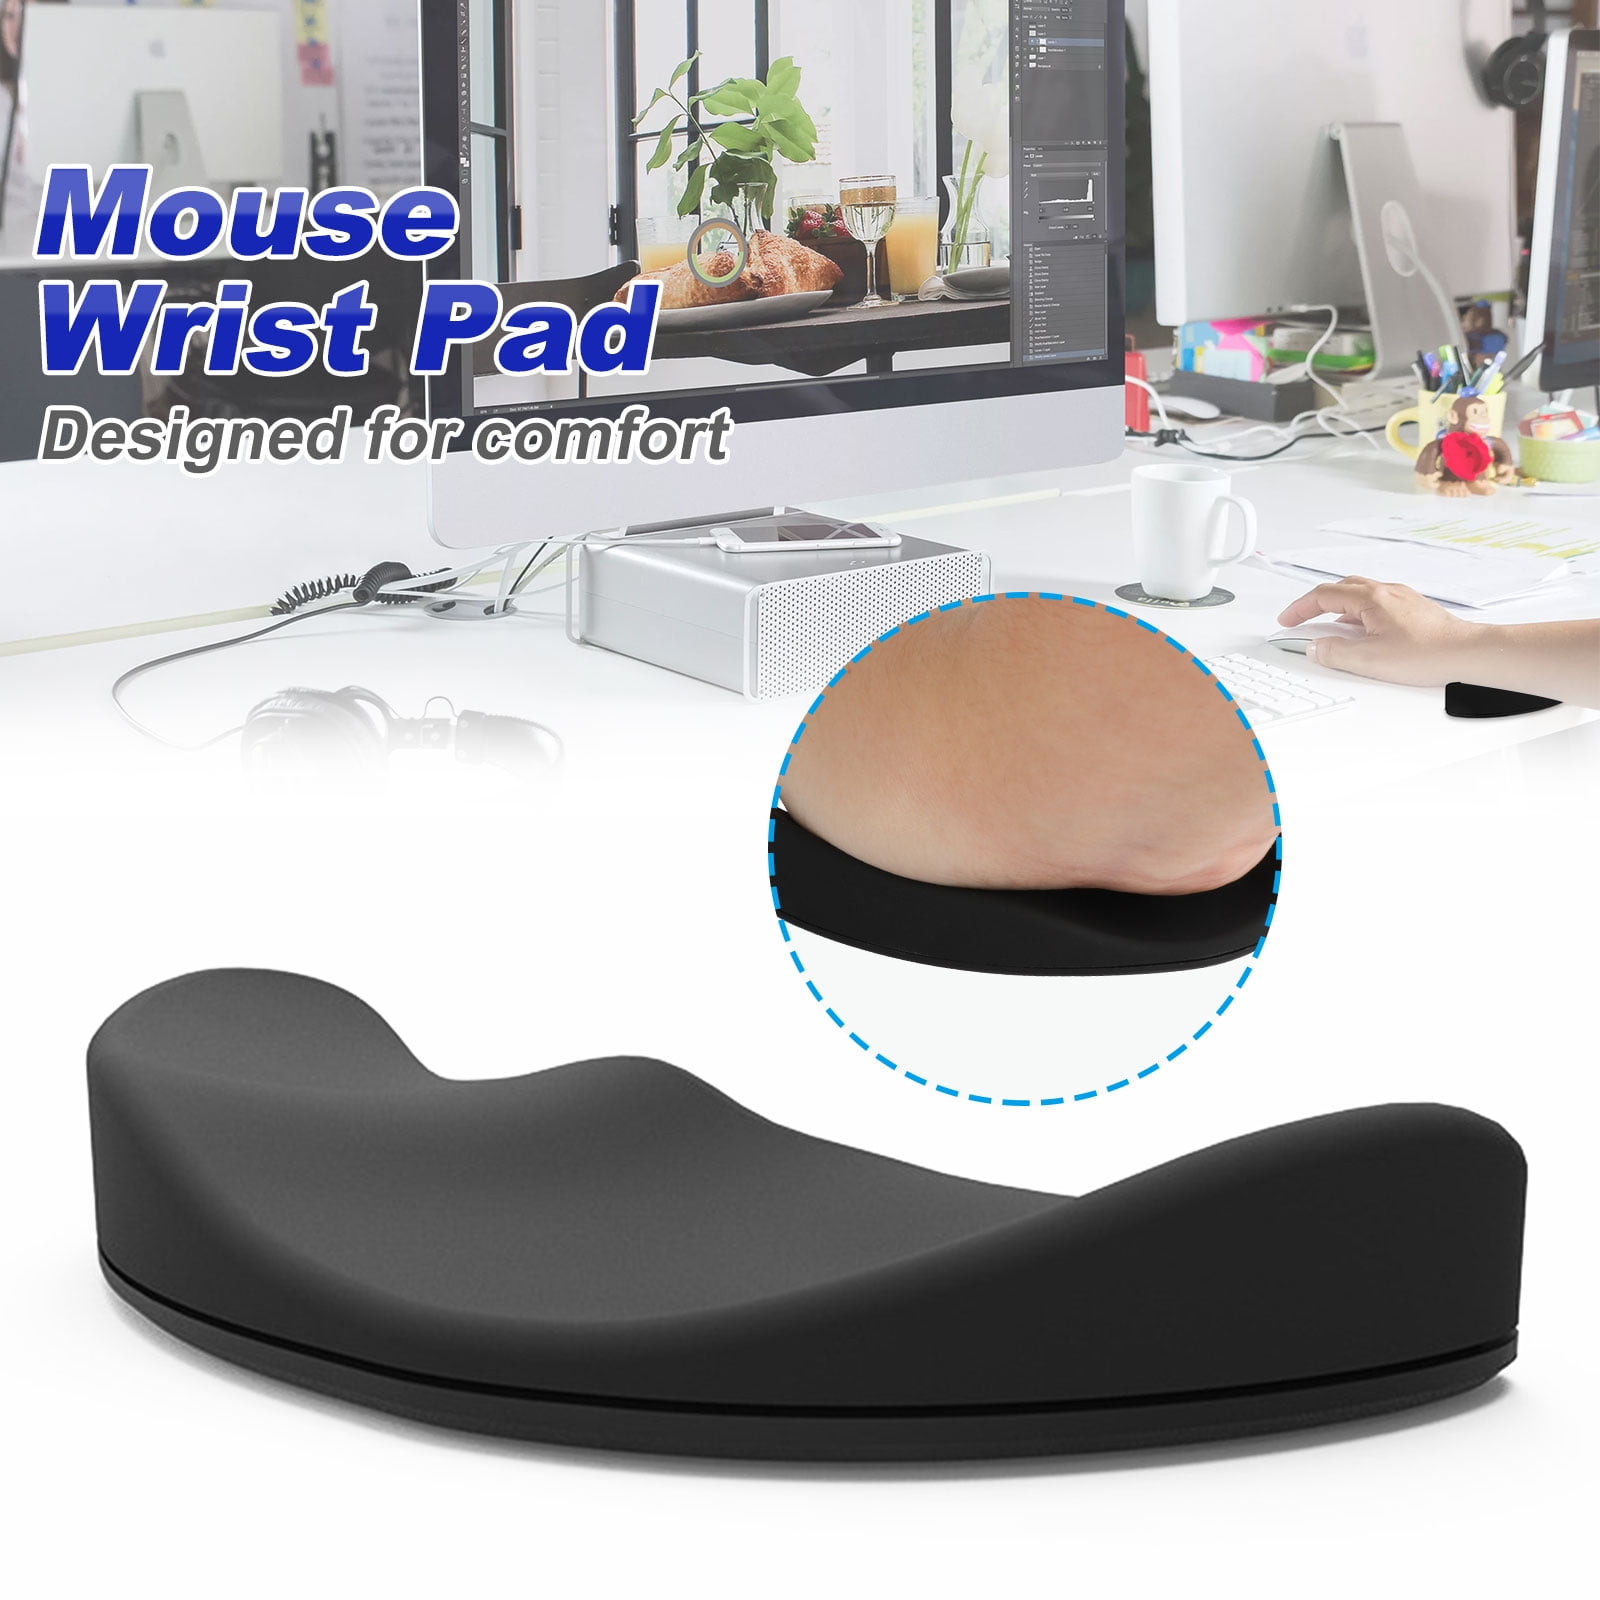 Gliding Wrist Rest Pad For Optical Mouse Support Wrist Comport Roller Pad Black 